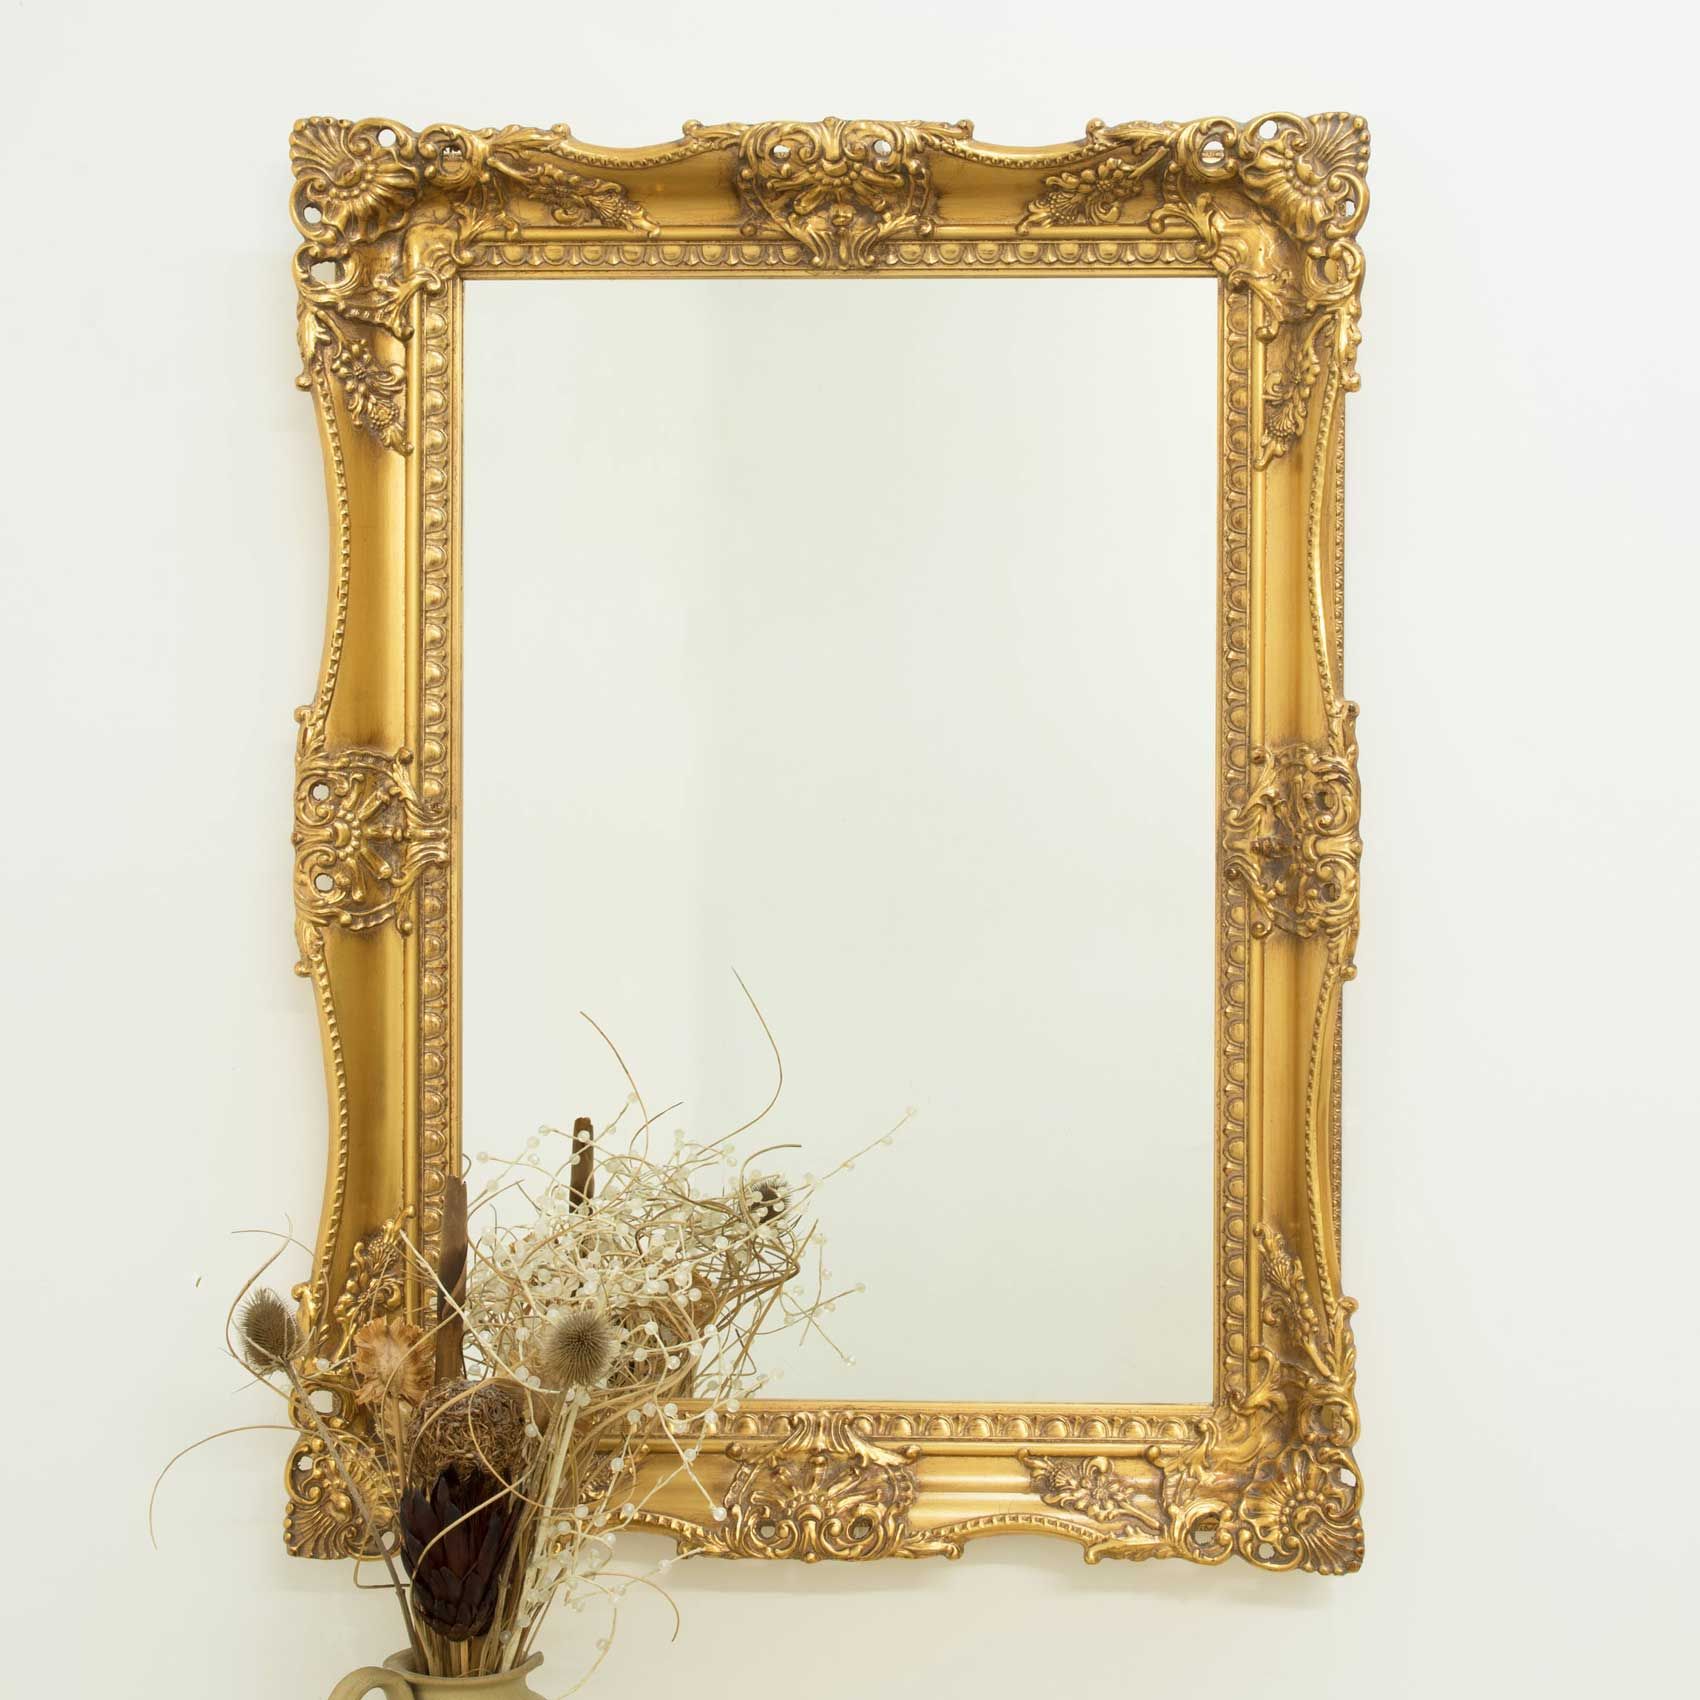 Extra Large Gold Ornate Vintage Wall Mirror 3Ft1 X 2Ft3, 94Cm X 68Cm Within Antique Aluminum Wall Mirrors (View 12 of 15)